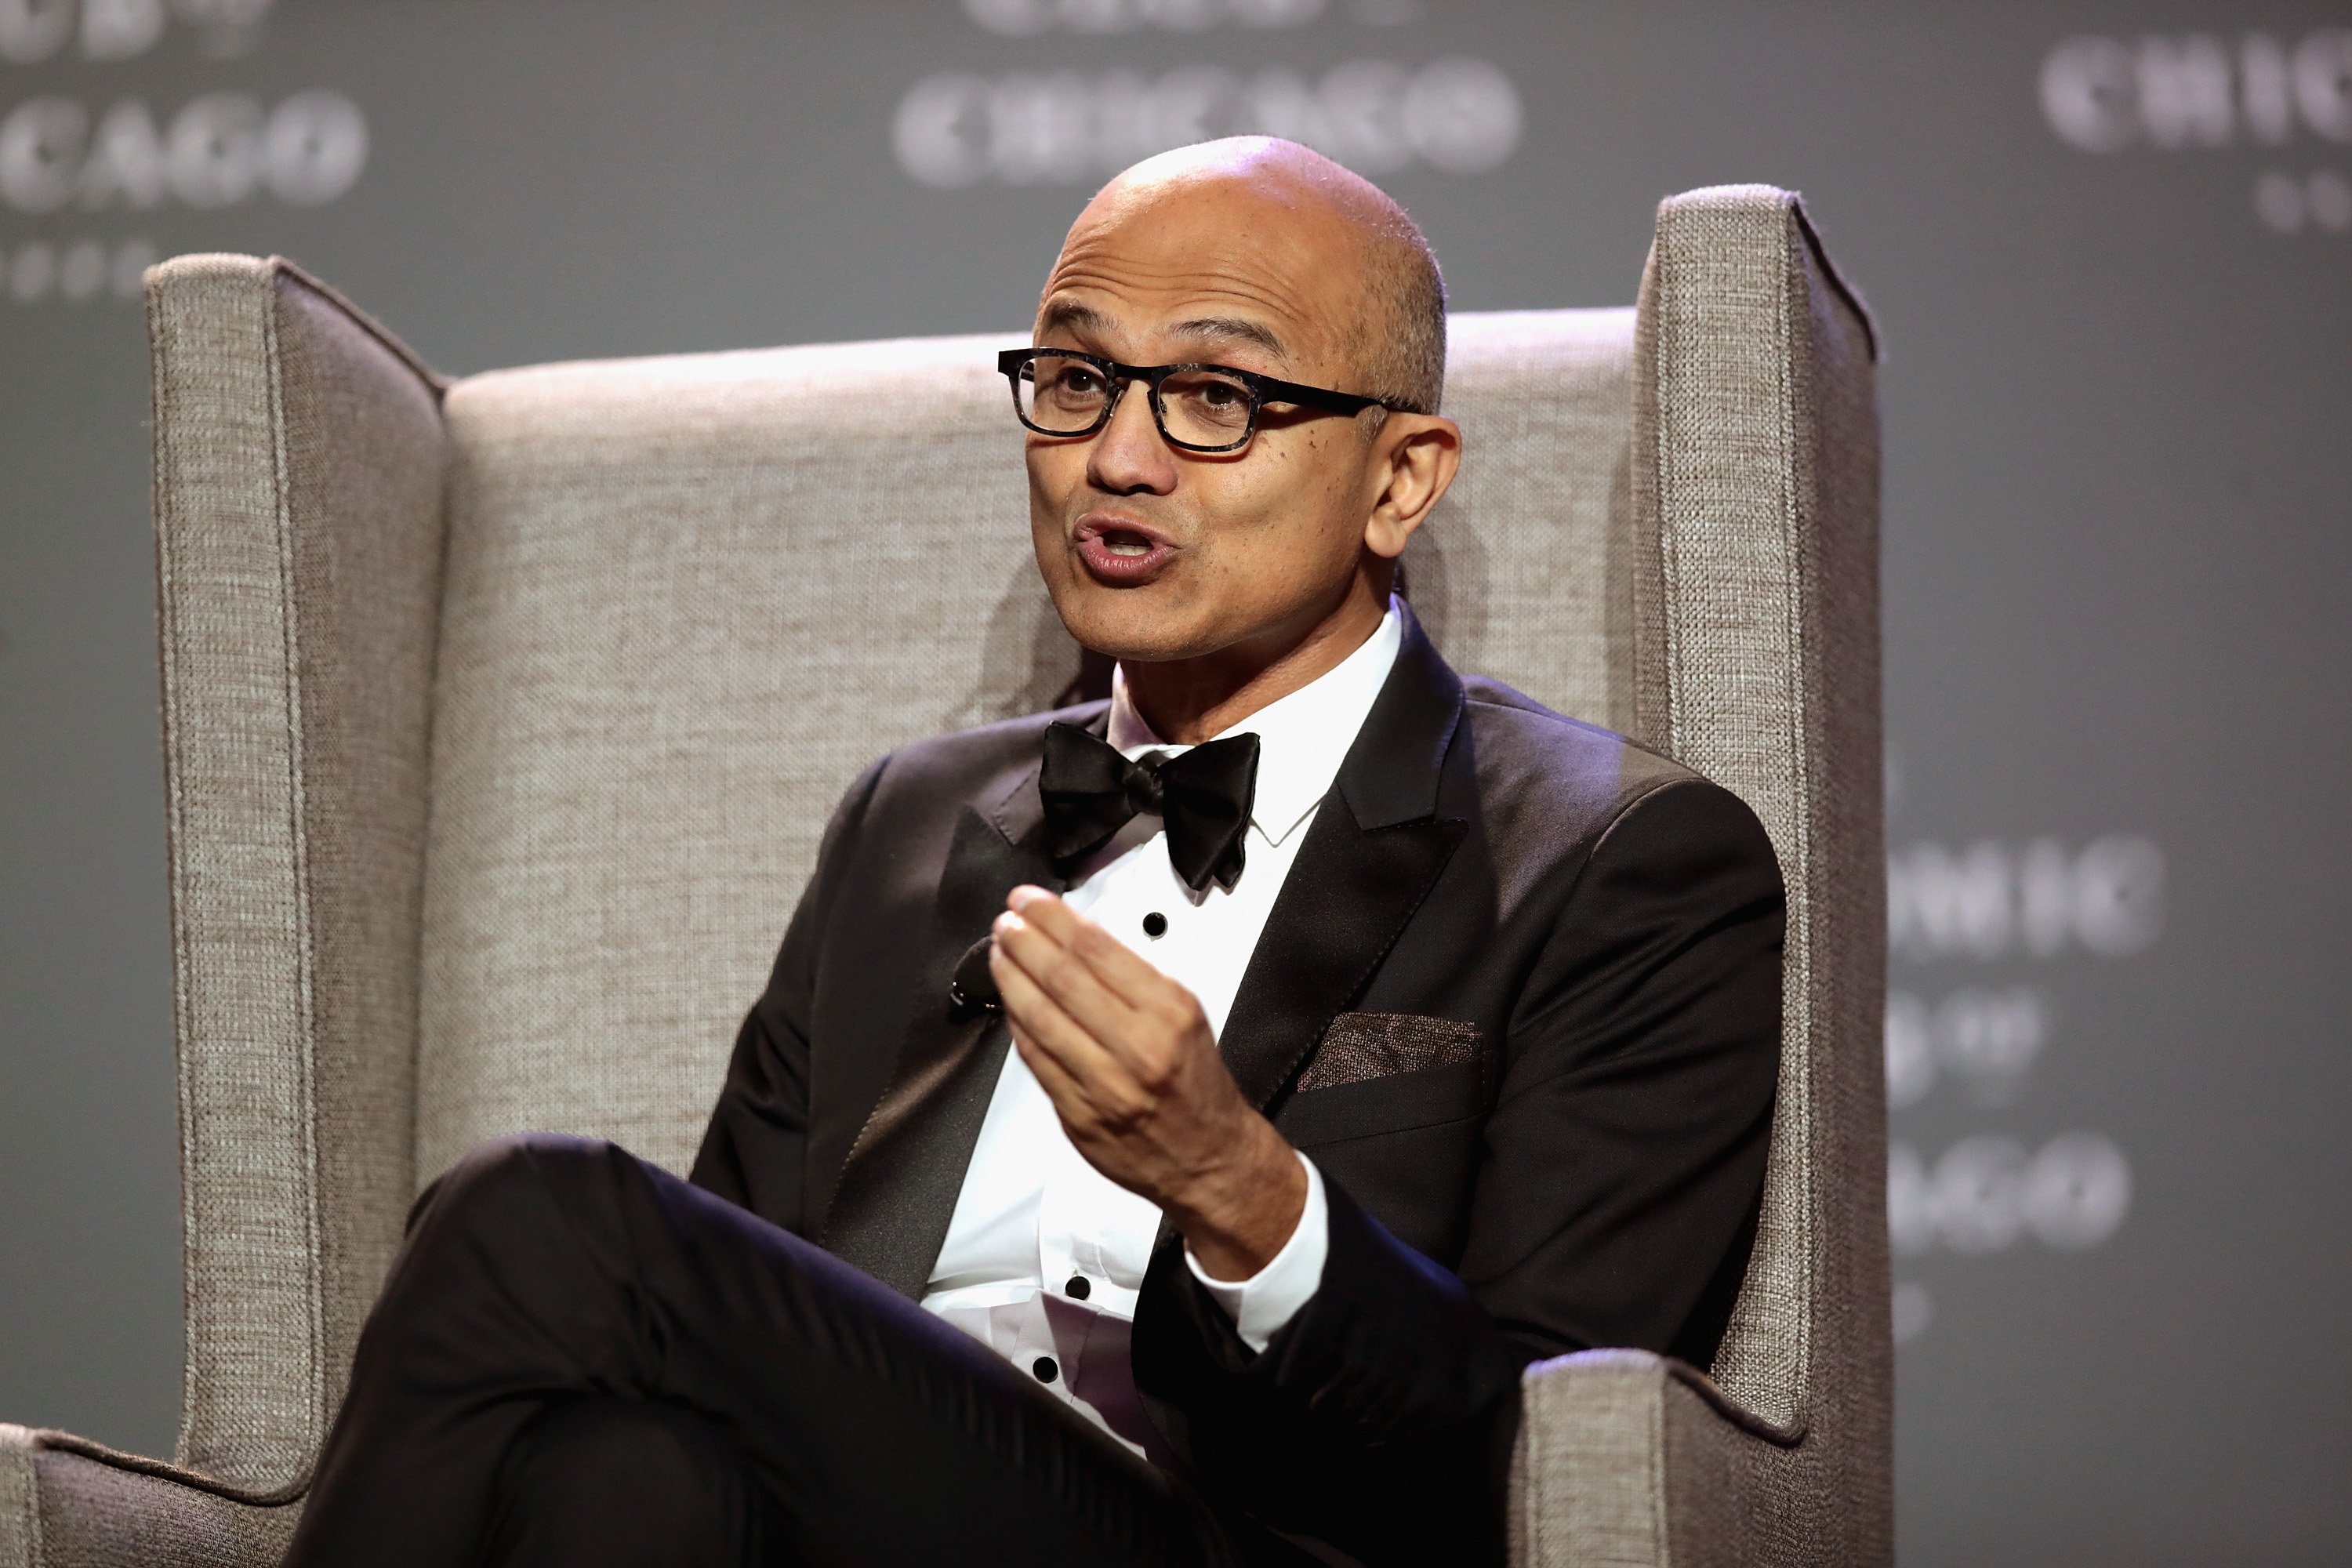 Microsoft CEO Satya Nadella speaking in a black tail coat with bowtie while he sits in a chair.